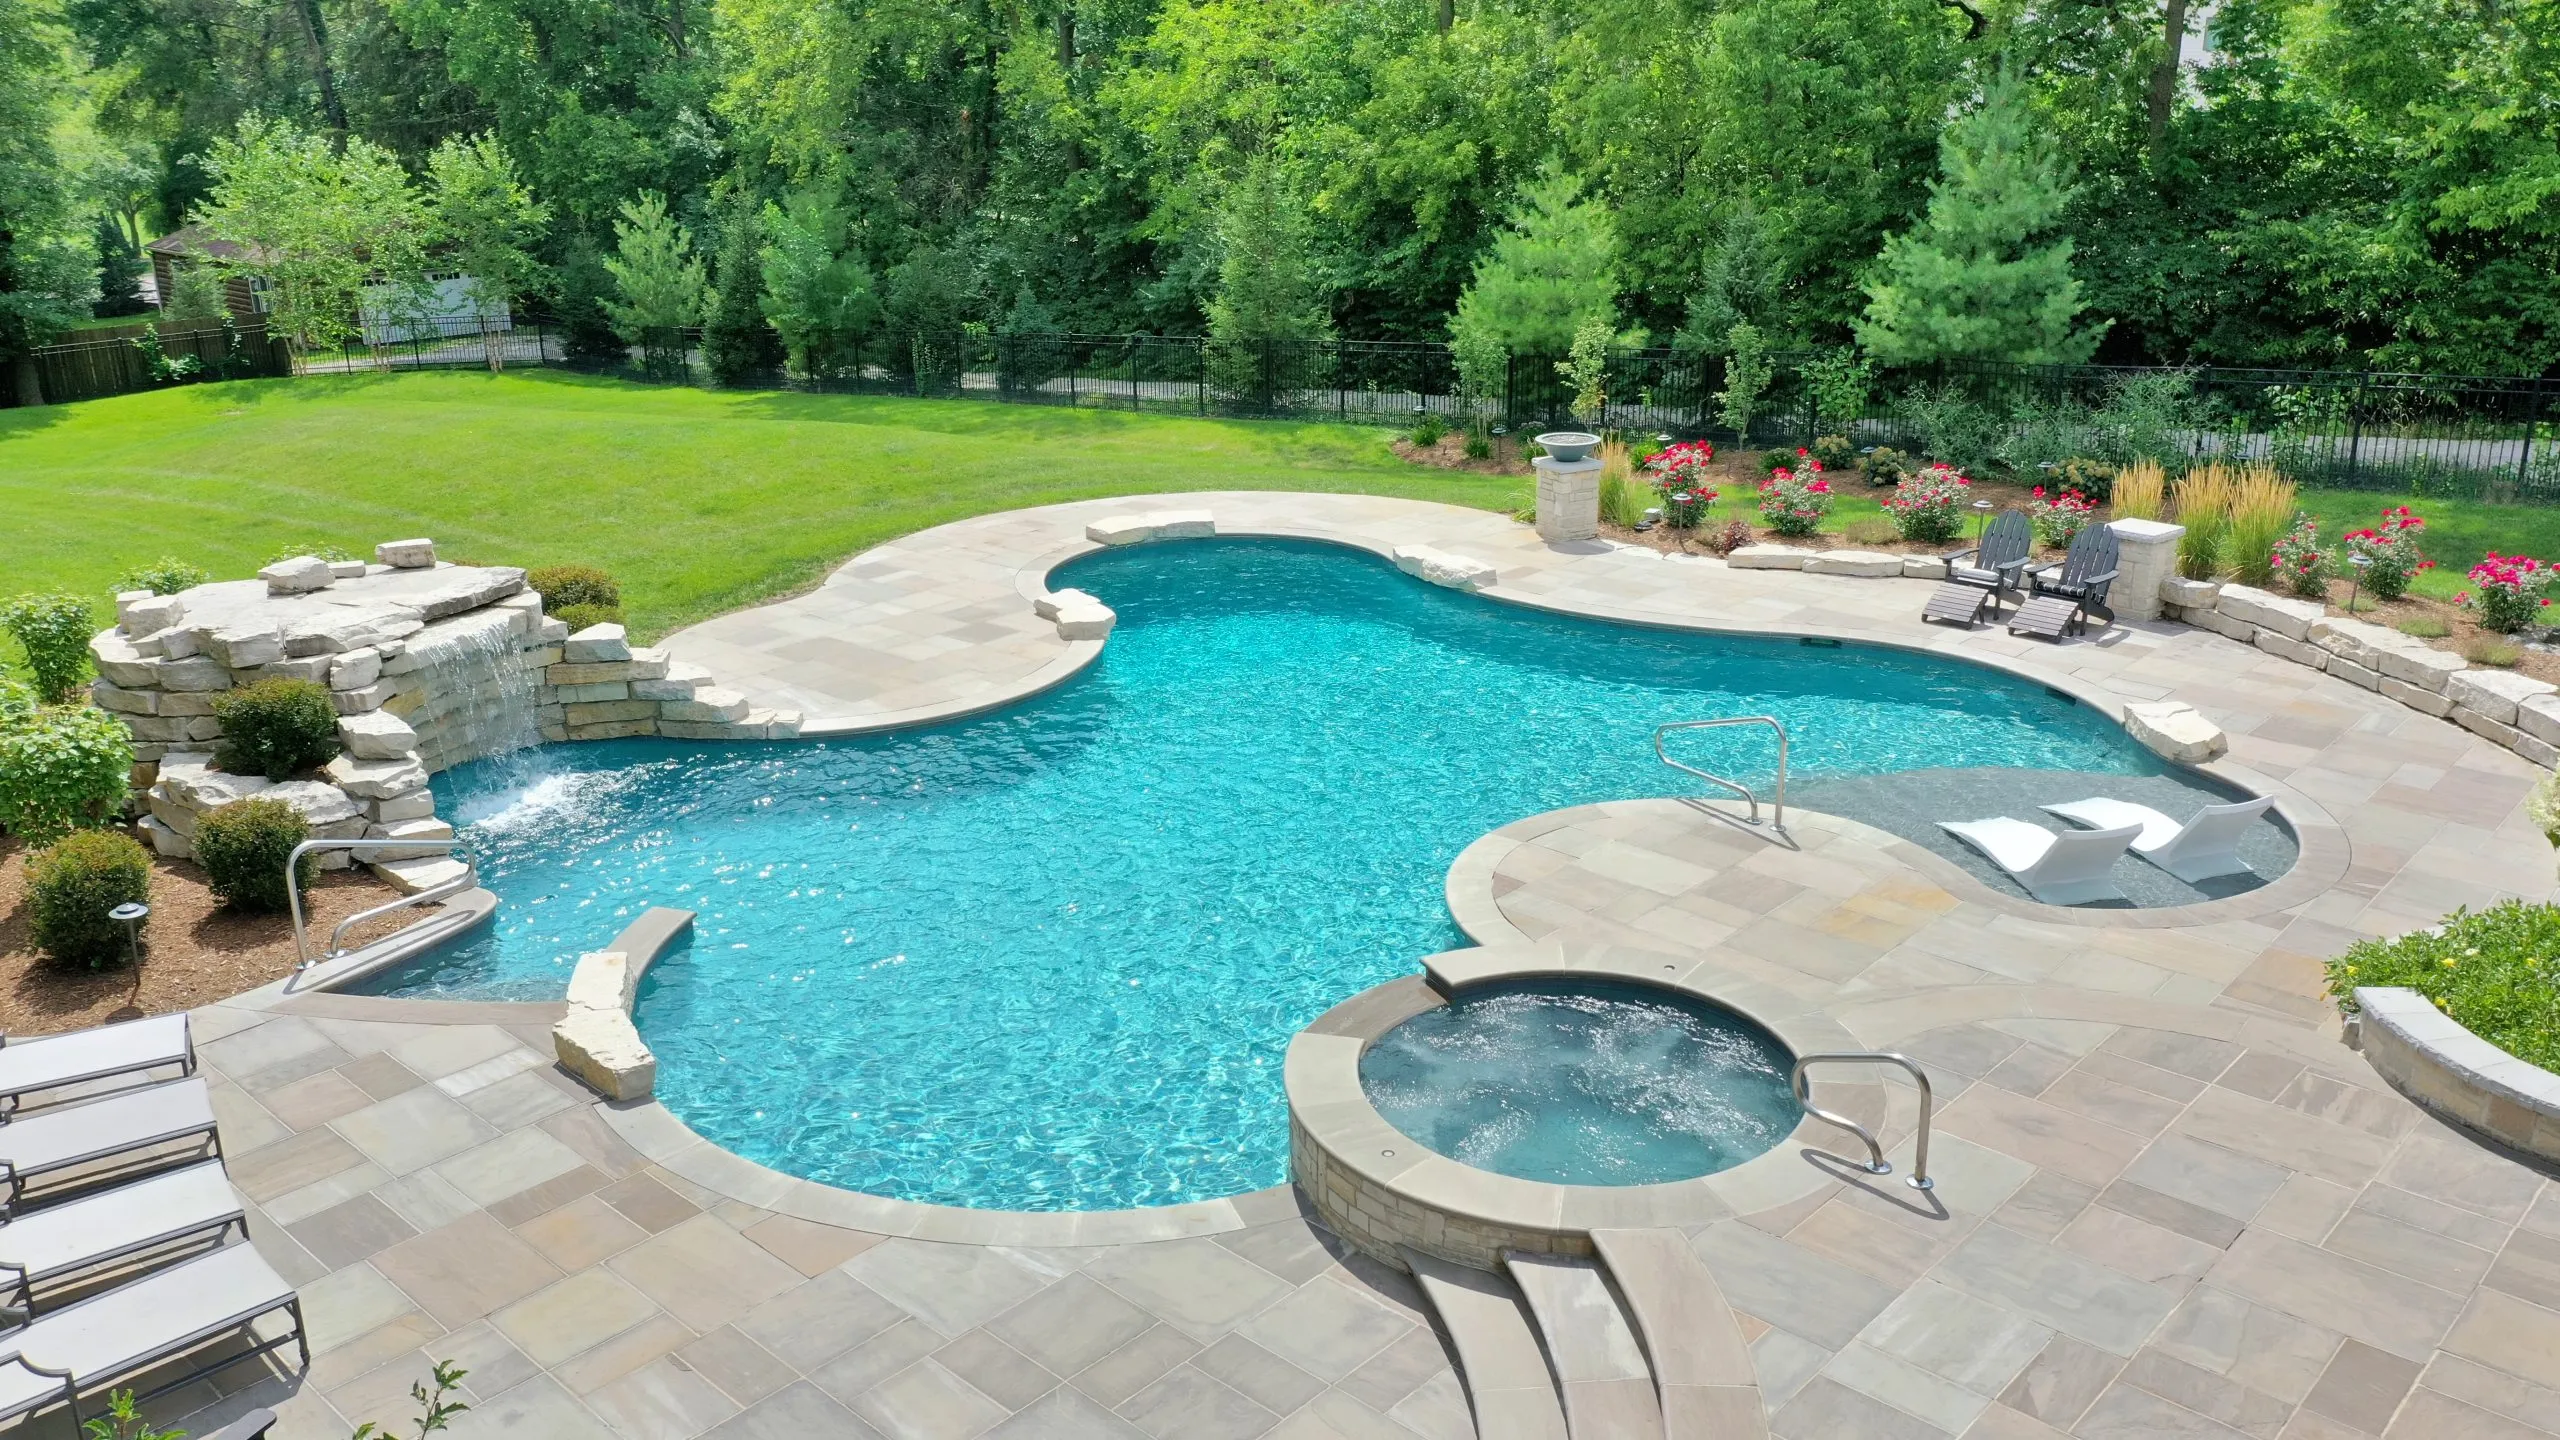 How to Extend Your Pool Season